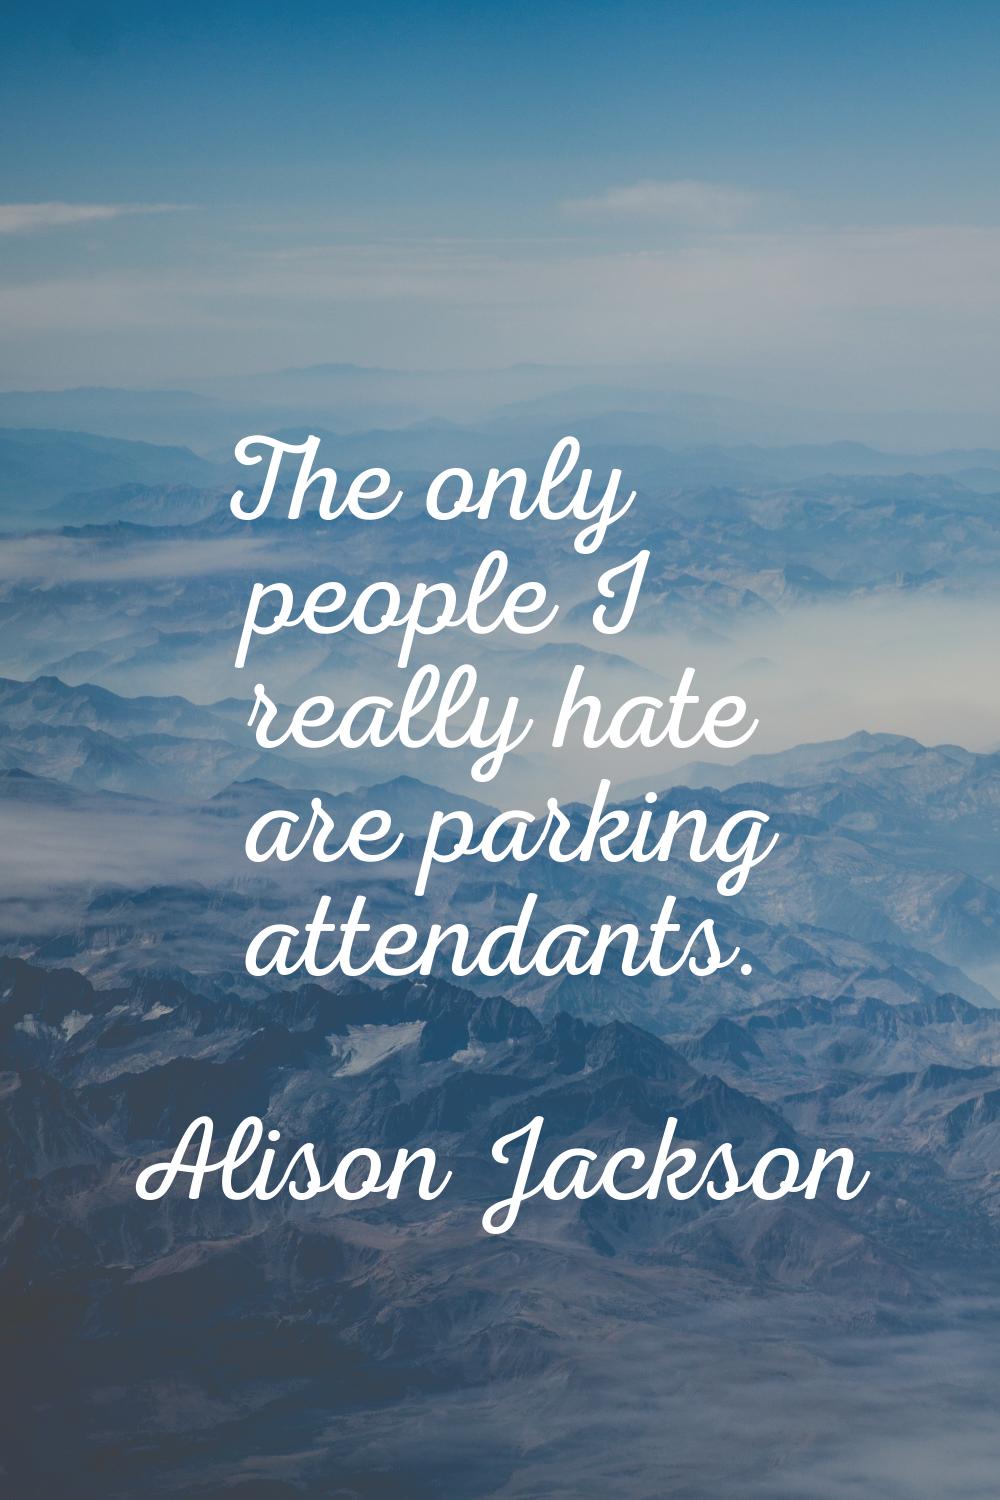 The only people I really hate are parking attendants.